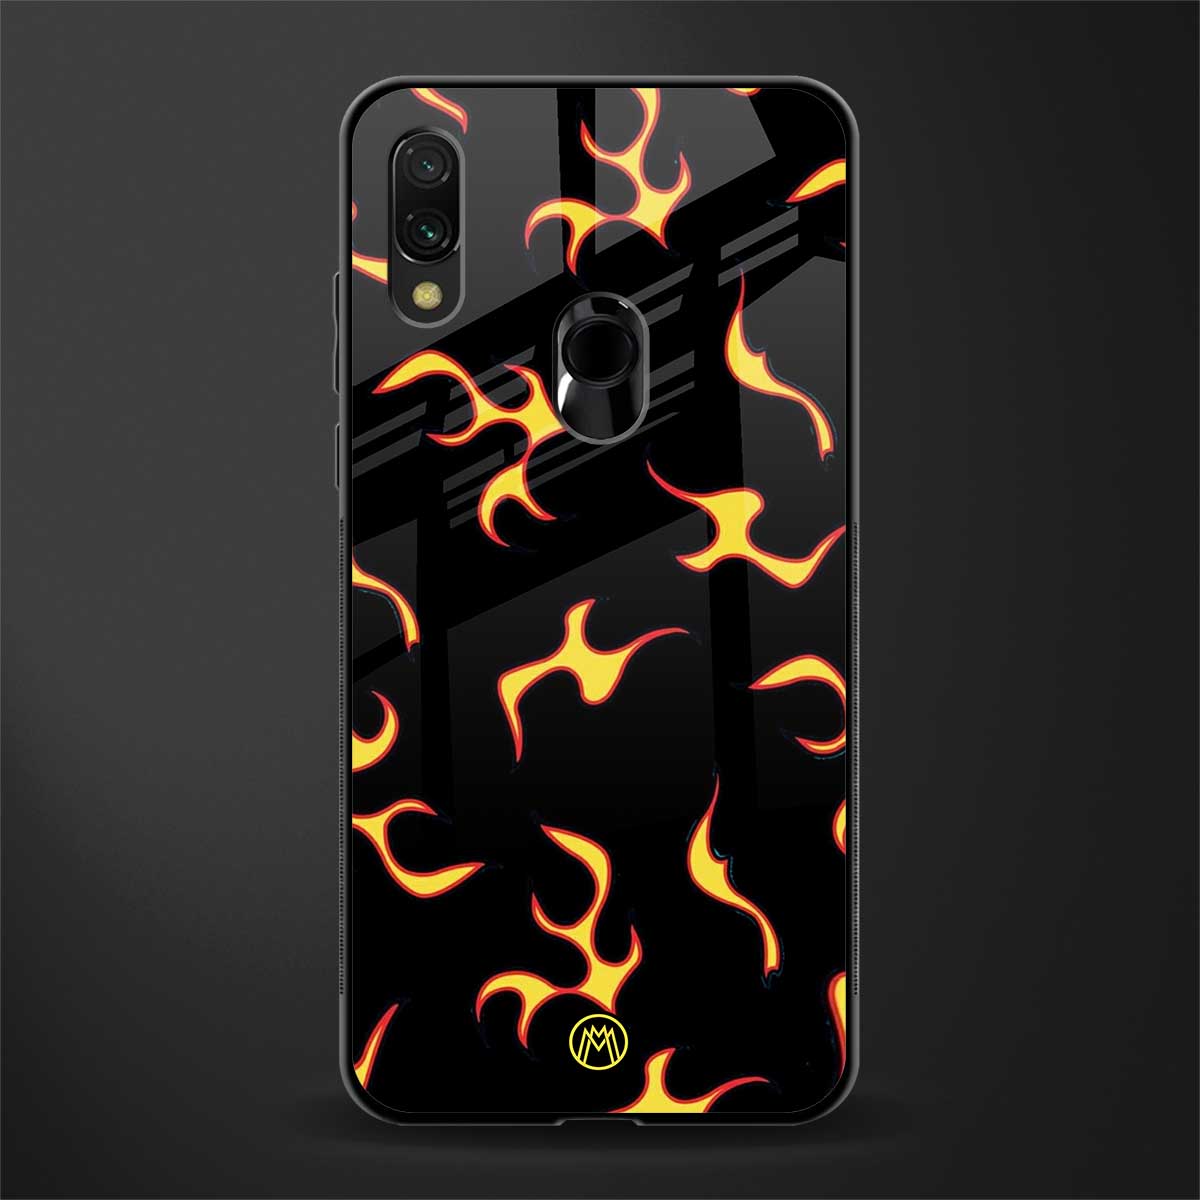 lil flames on black glass case for redmi y3 image